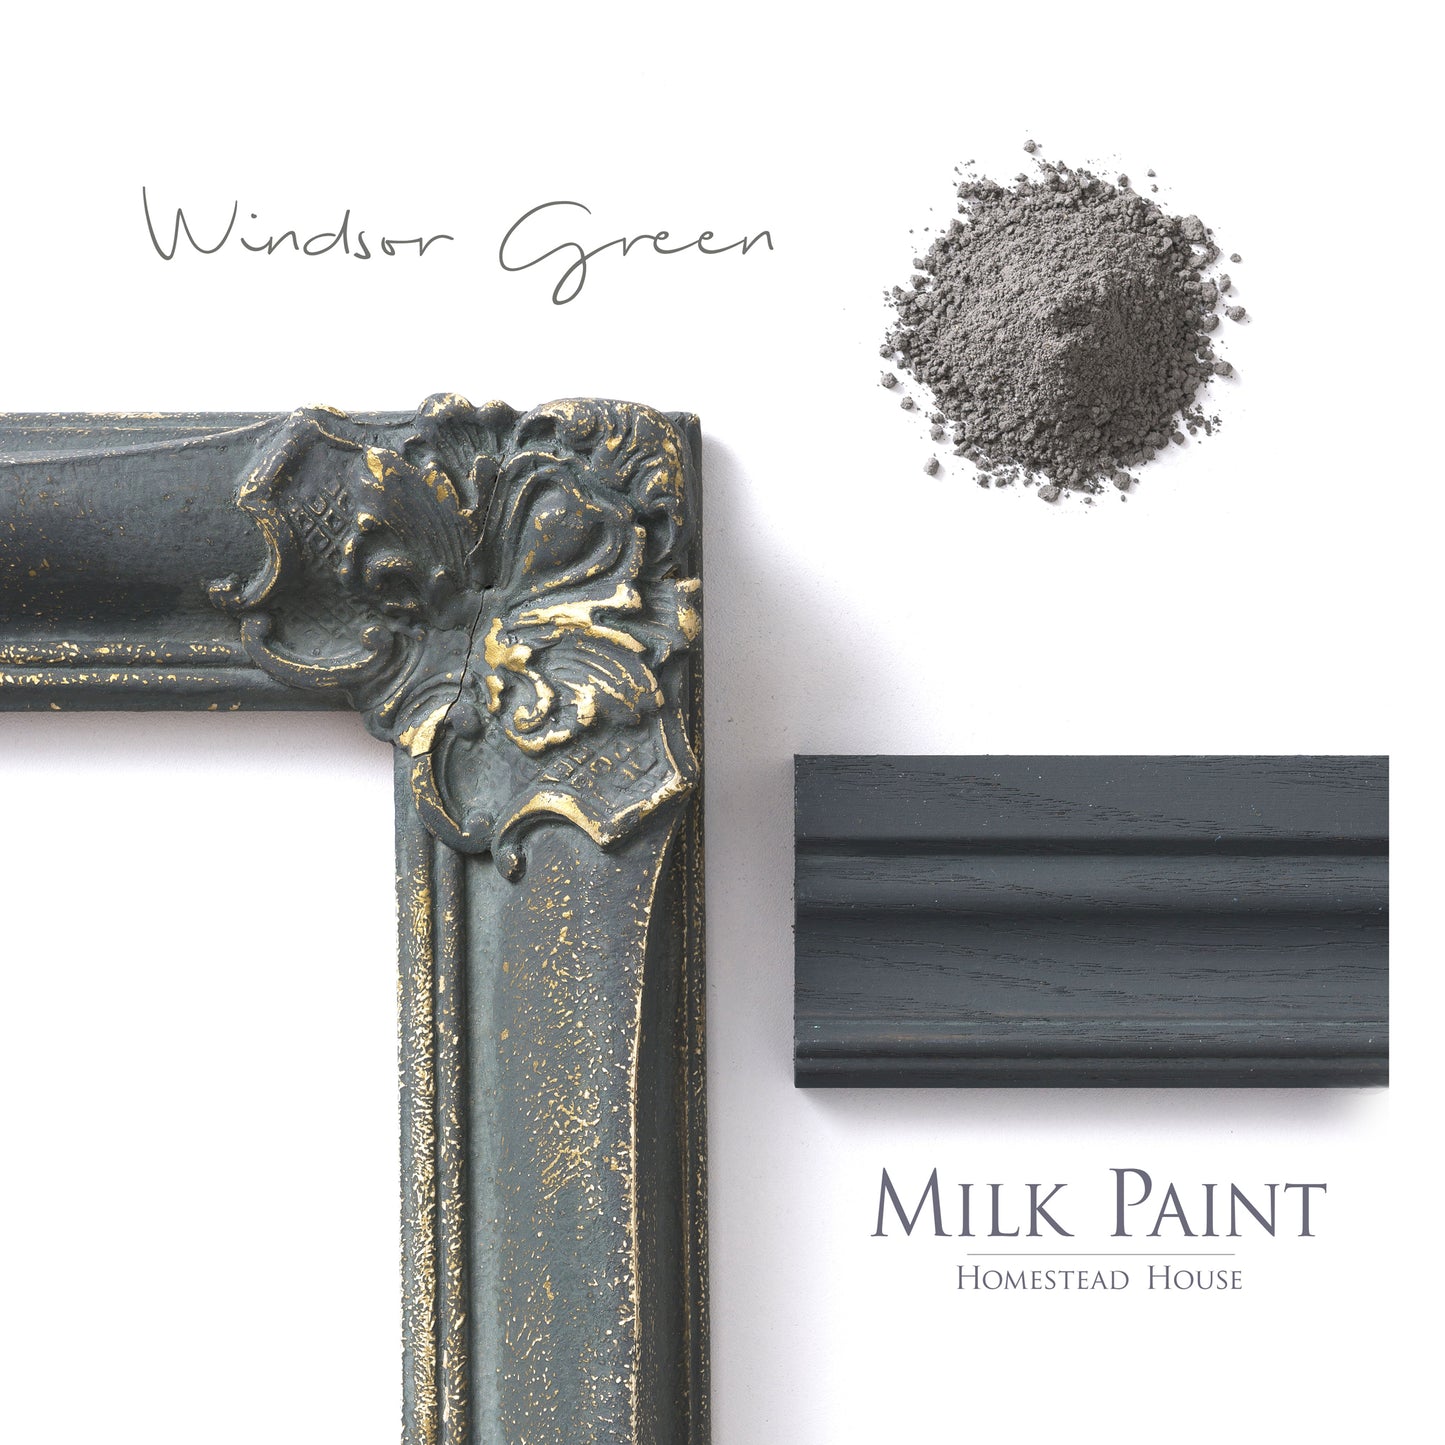 Milk Paint from Homestead House in Windsor Green, This deep green has grey undertones.  |  homesteadhouse.ca